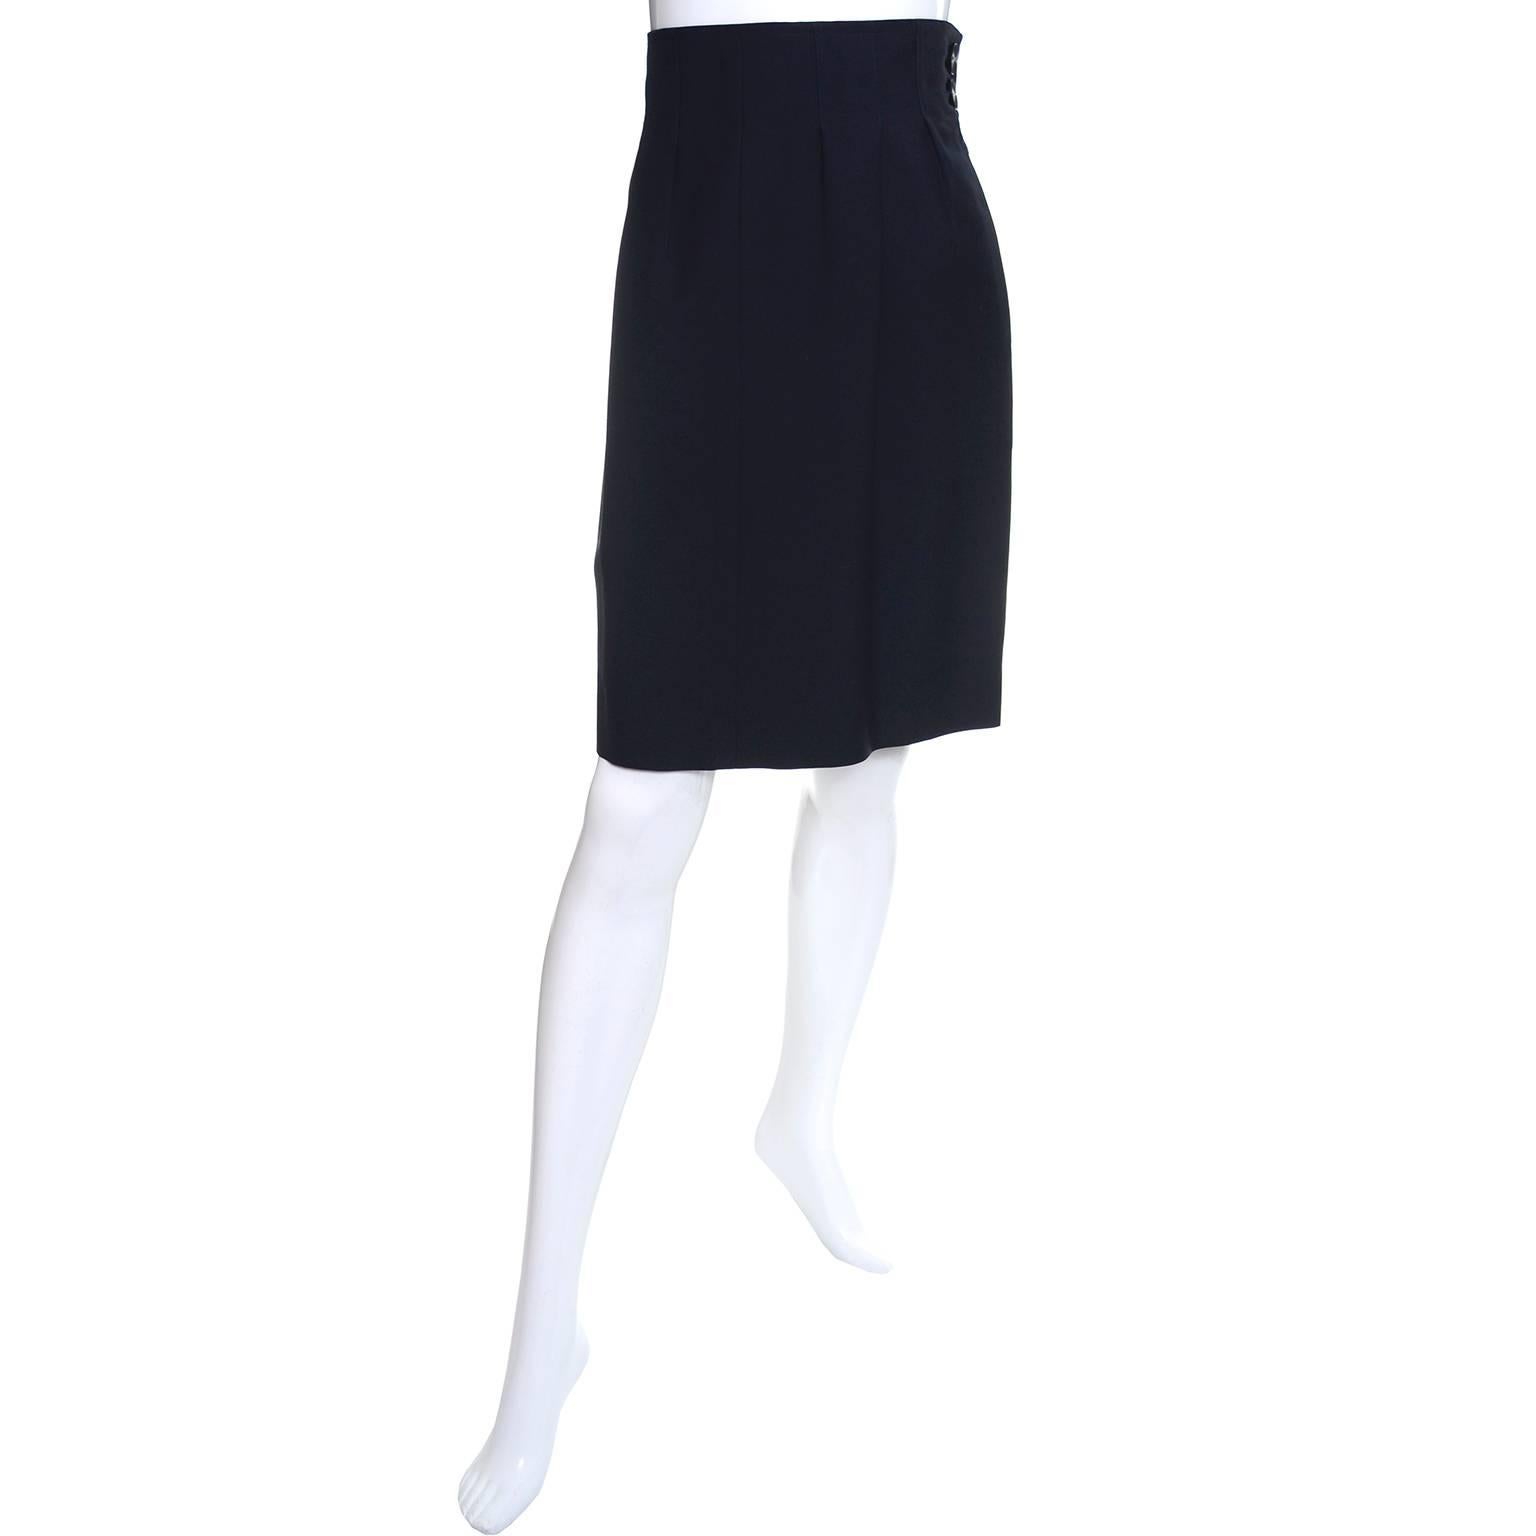 This is a fabulous vintage skirt from Yves Saint Laurent with a high waist, side zipper, and side slit pockets.  This skirt is in excellent condition and is fully lined.  Please use the measurements as a guide for the best fit, but it is labeled a